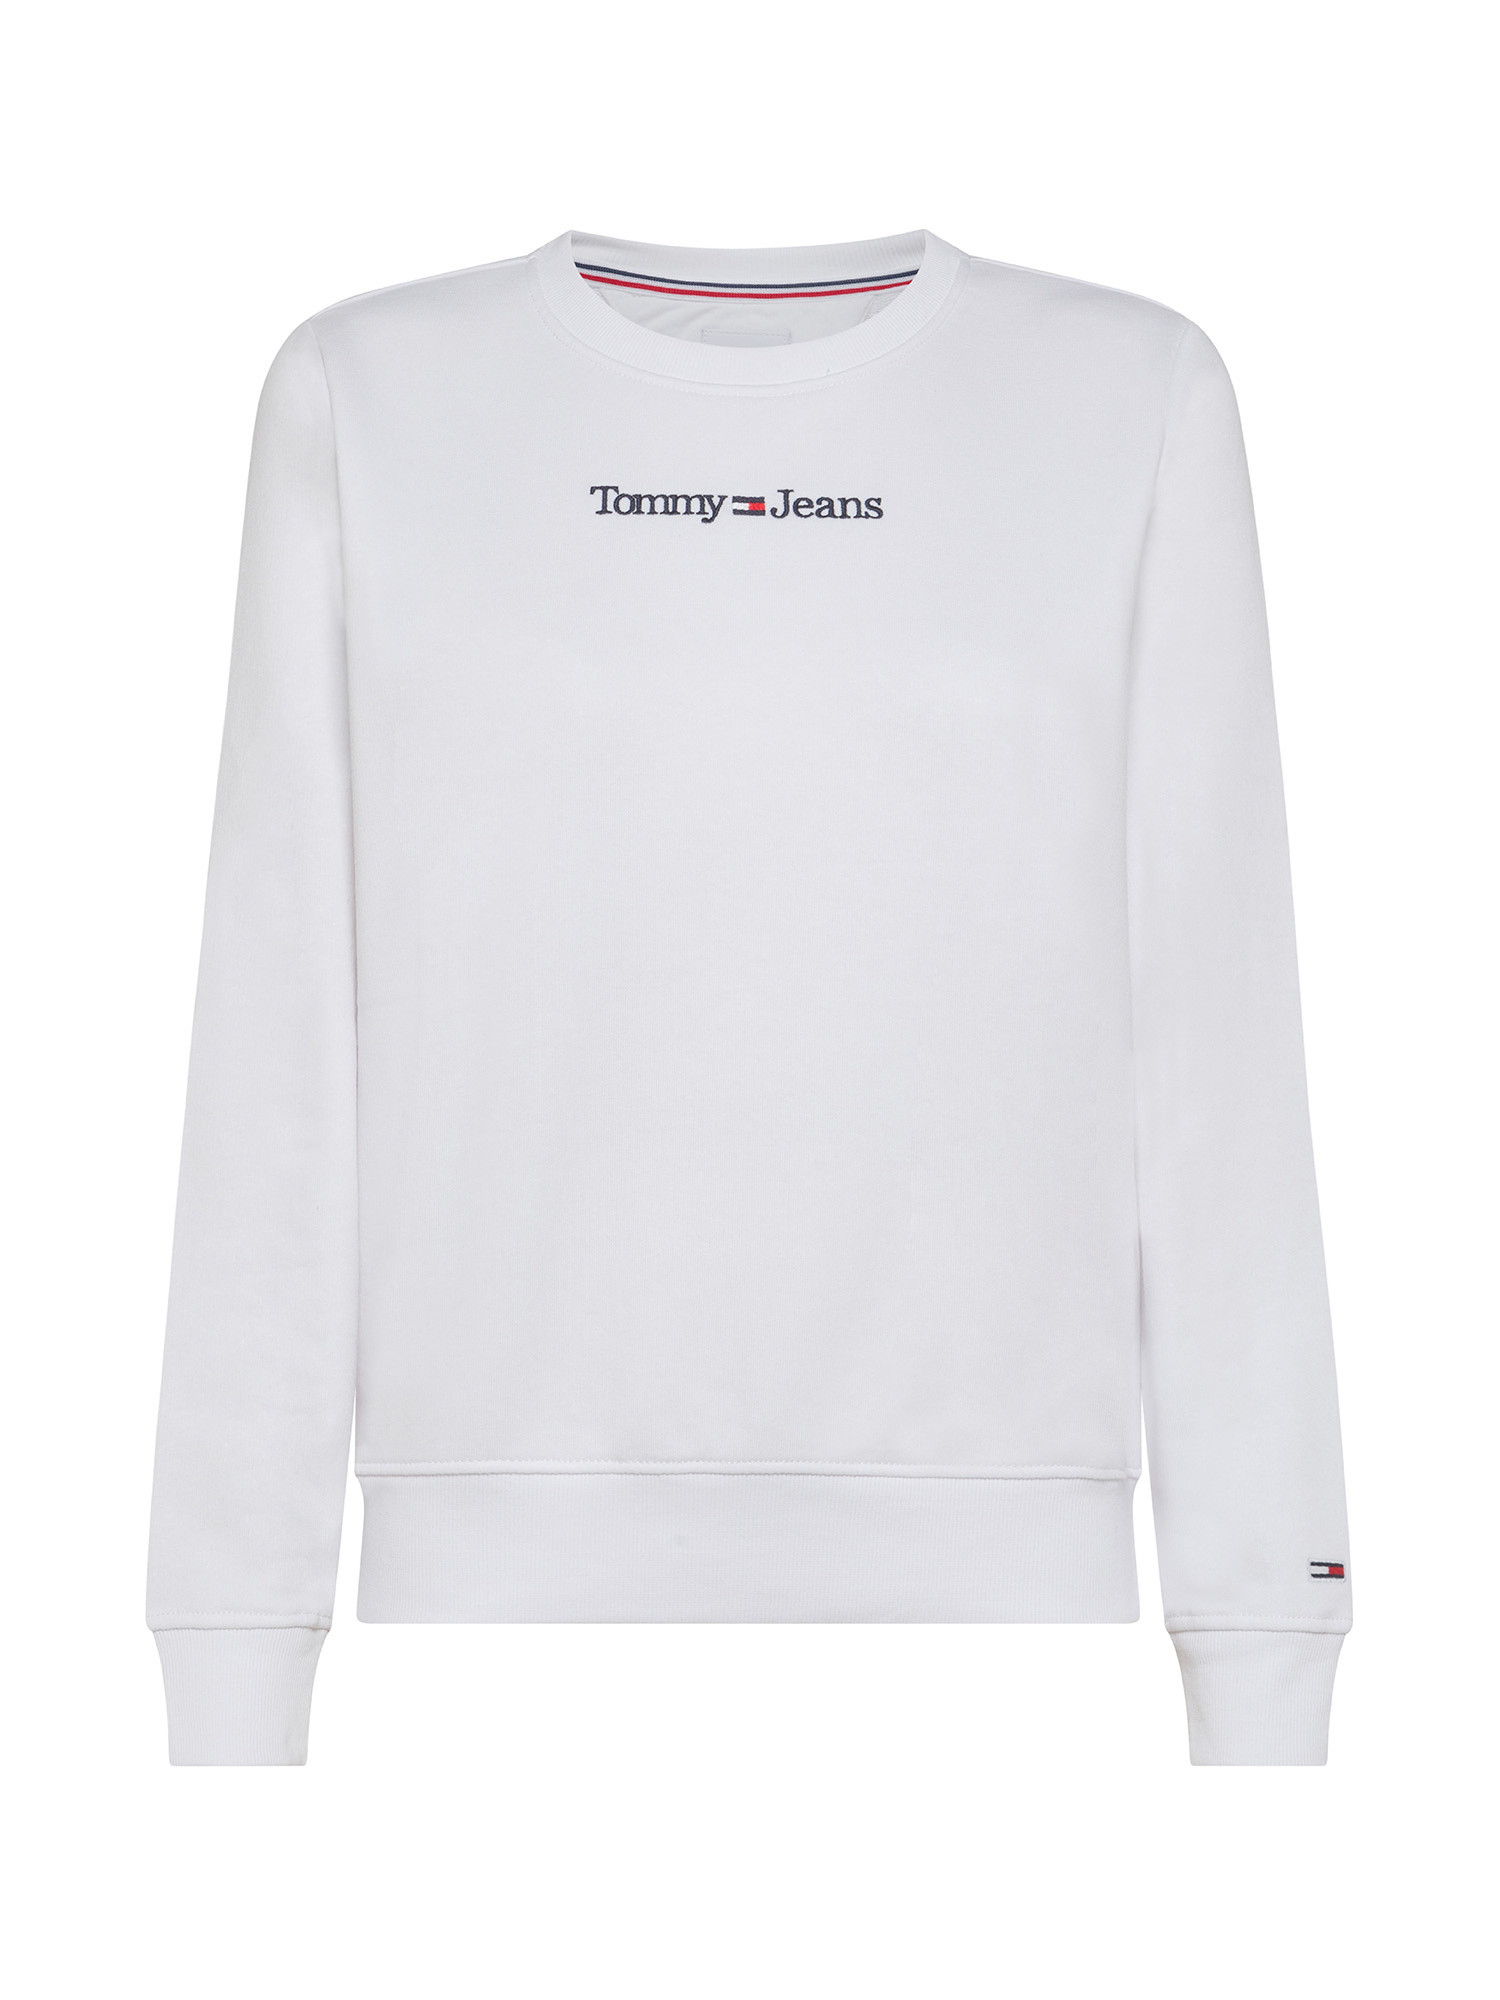 Tommy Jeans - Felpa girocollo in cotone con logo, Bianco, large image number 0